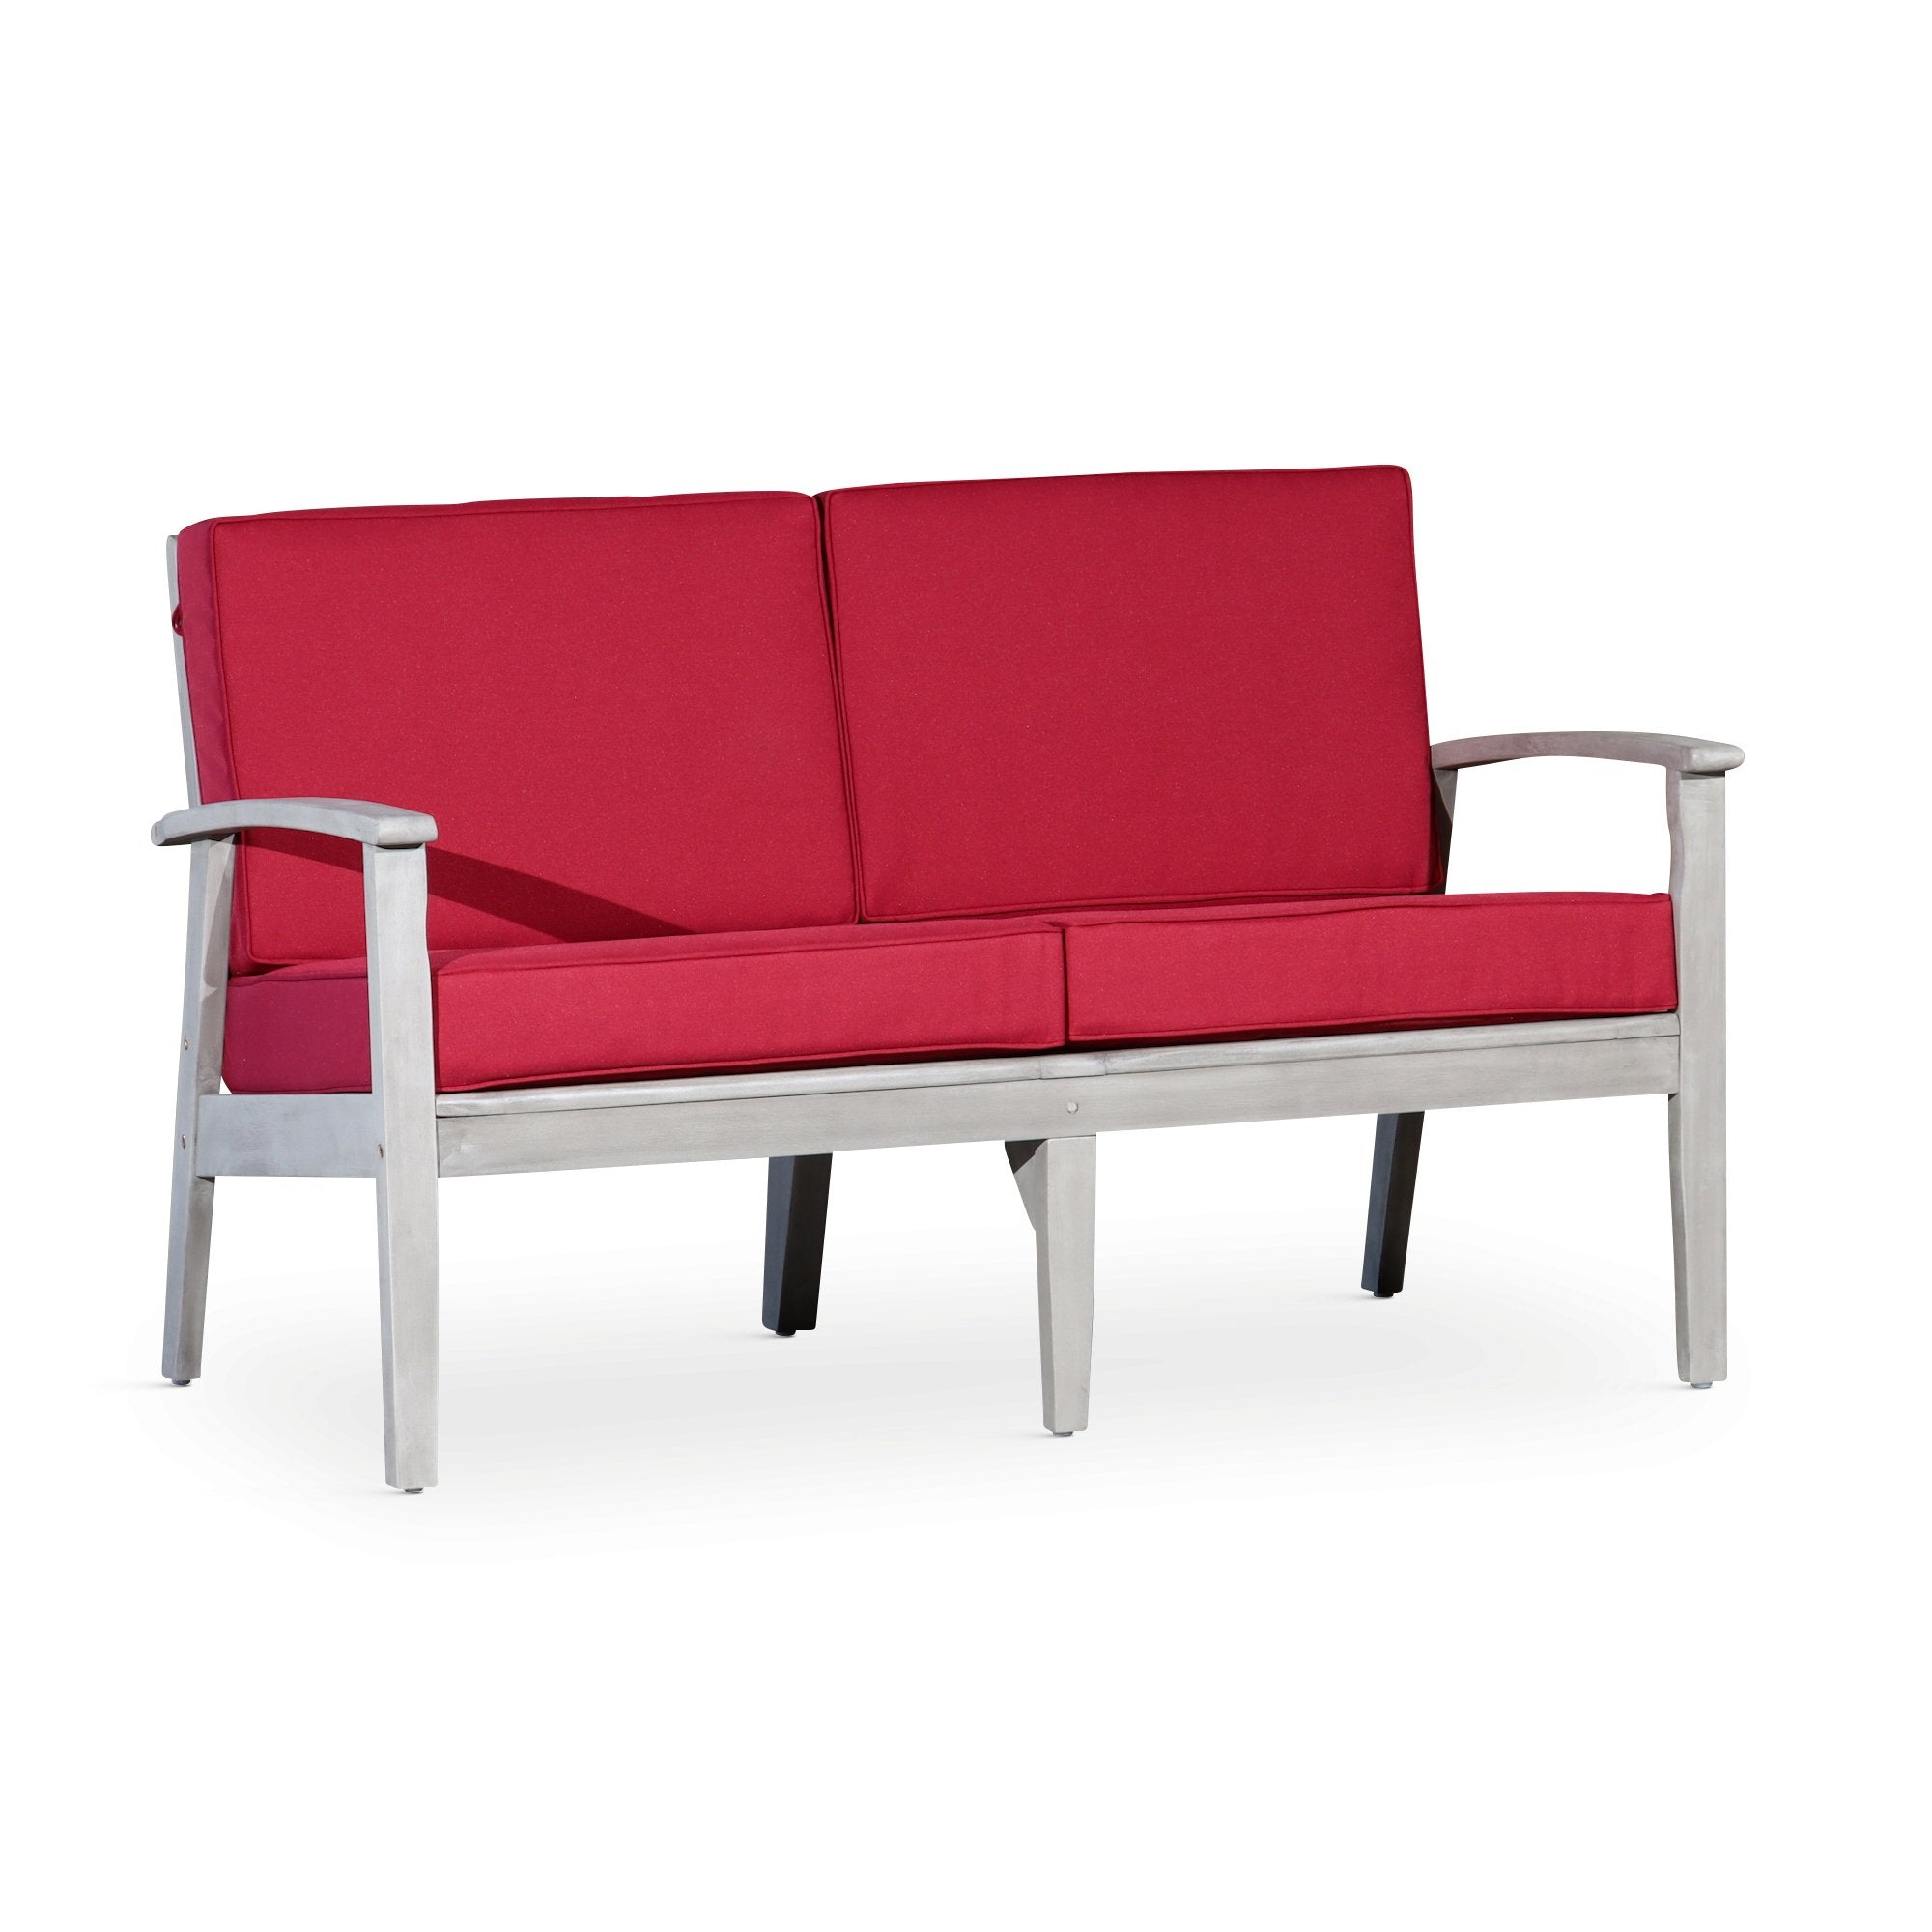 Outdoor-Loveseat-with-Cushions,-Silver-Gray-Finish,-Burgundy-Cushions-Outdoor-Chairs